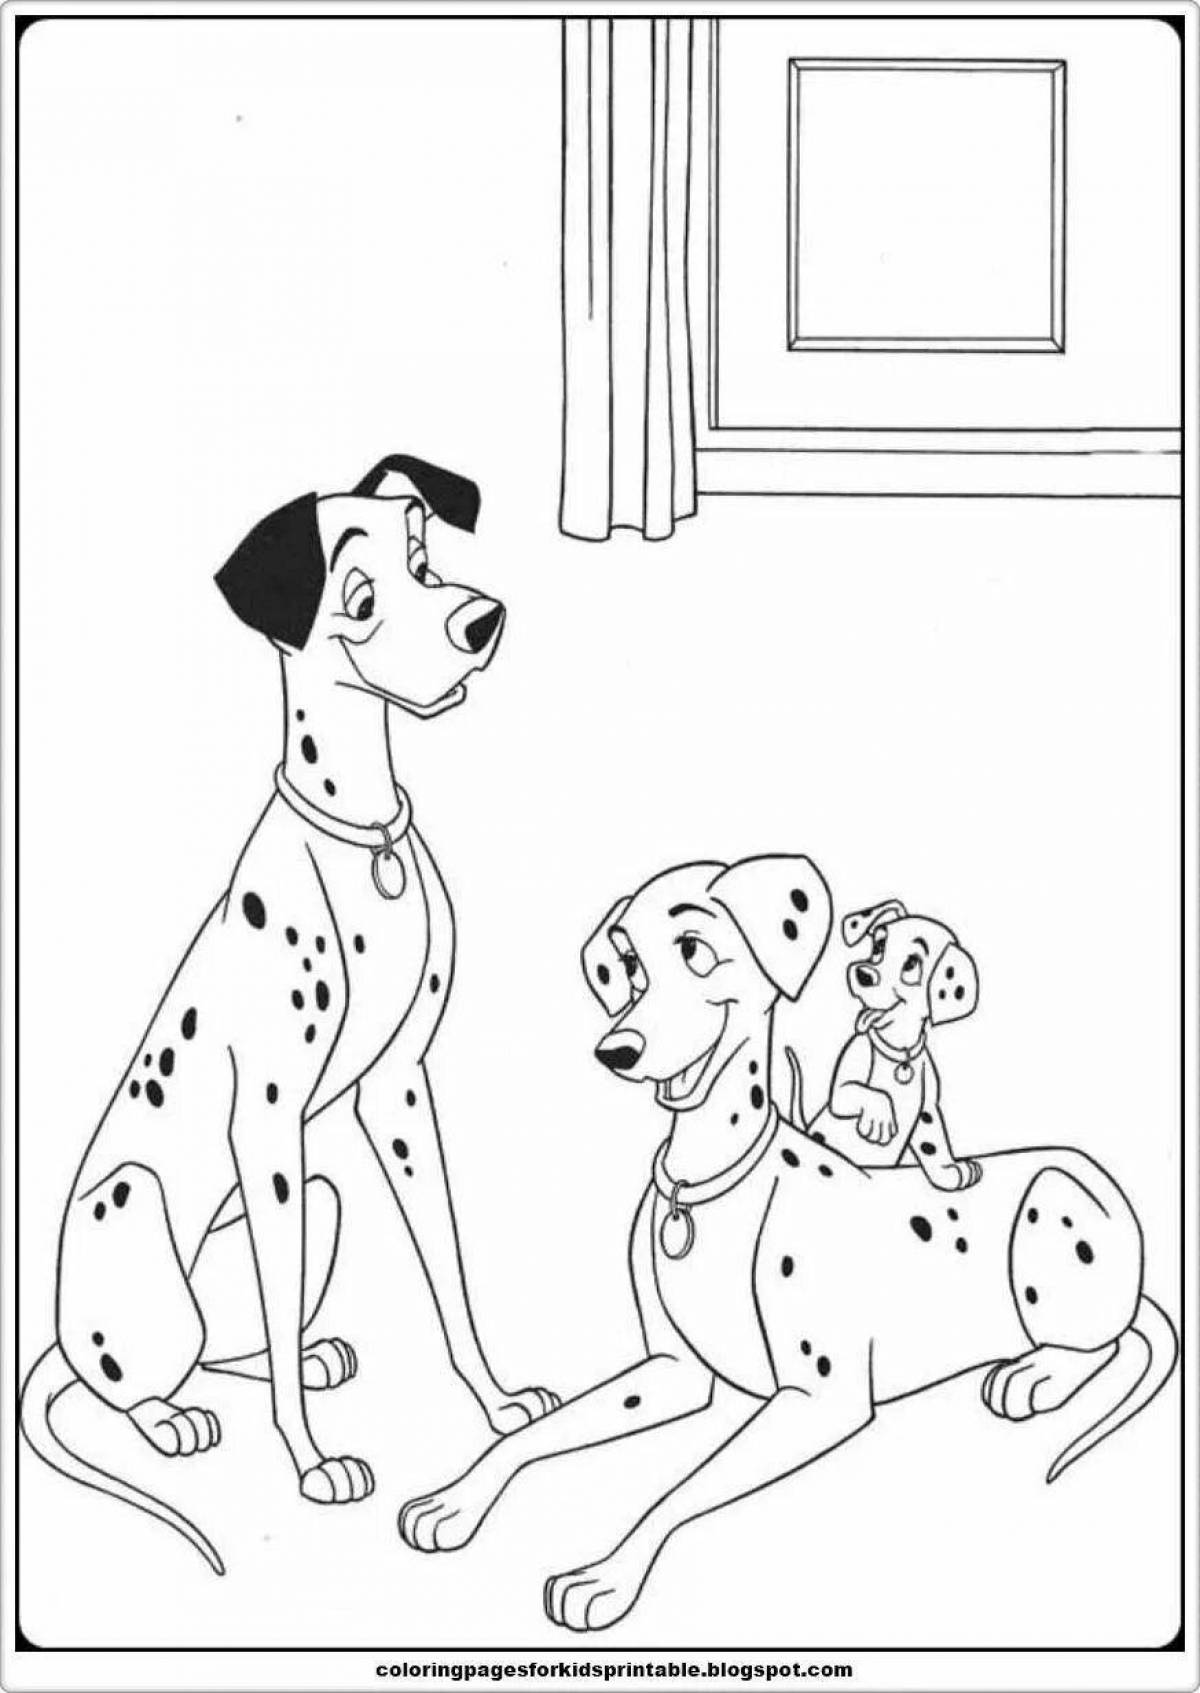 Cute dog family coloring book